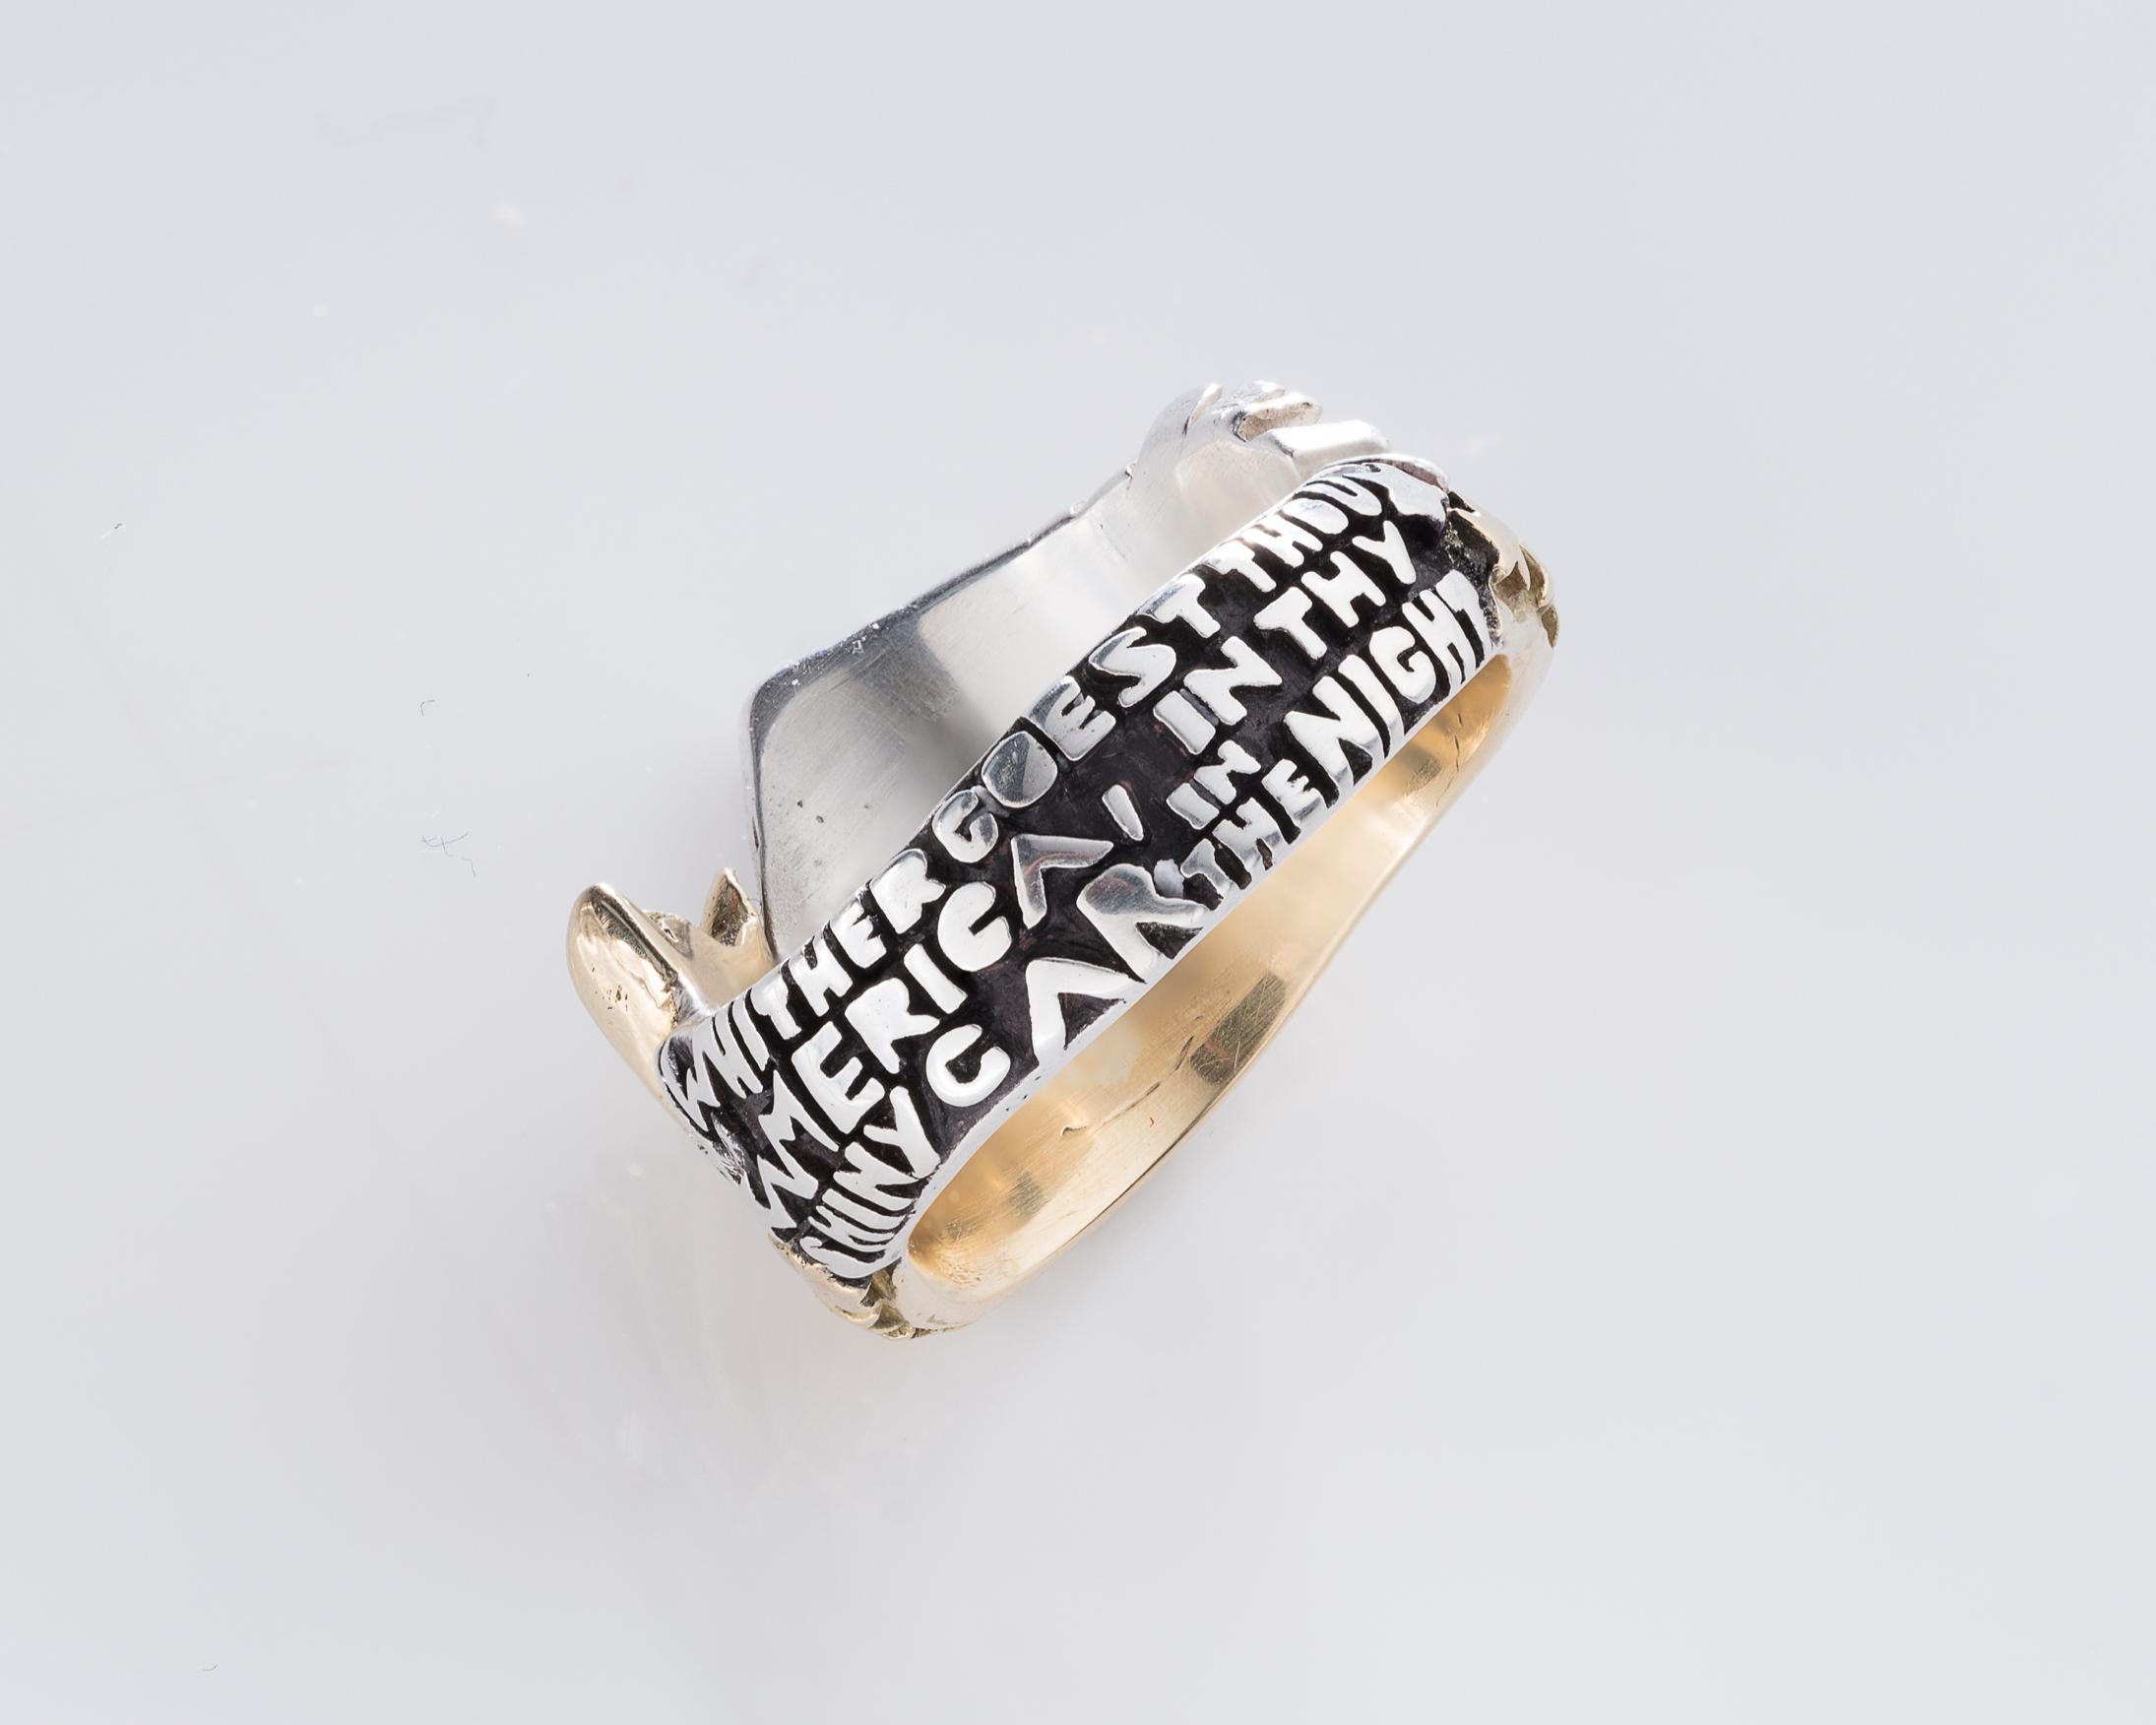 Untitled ring in sterling silver, 18-karat gold, rubies, and sapphires. Includes the following text carved on the verso of the ring band: 